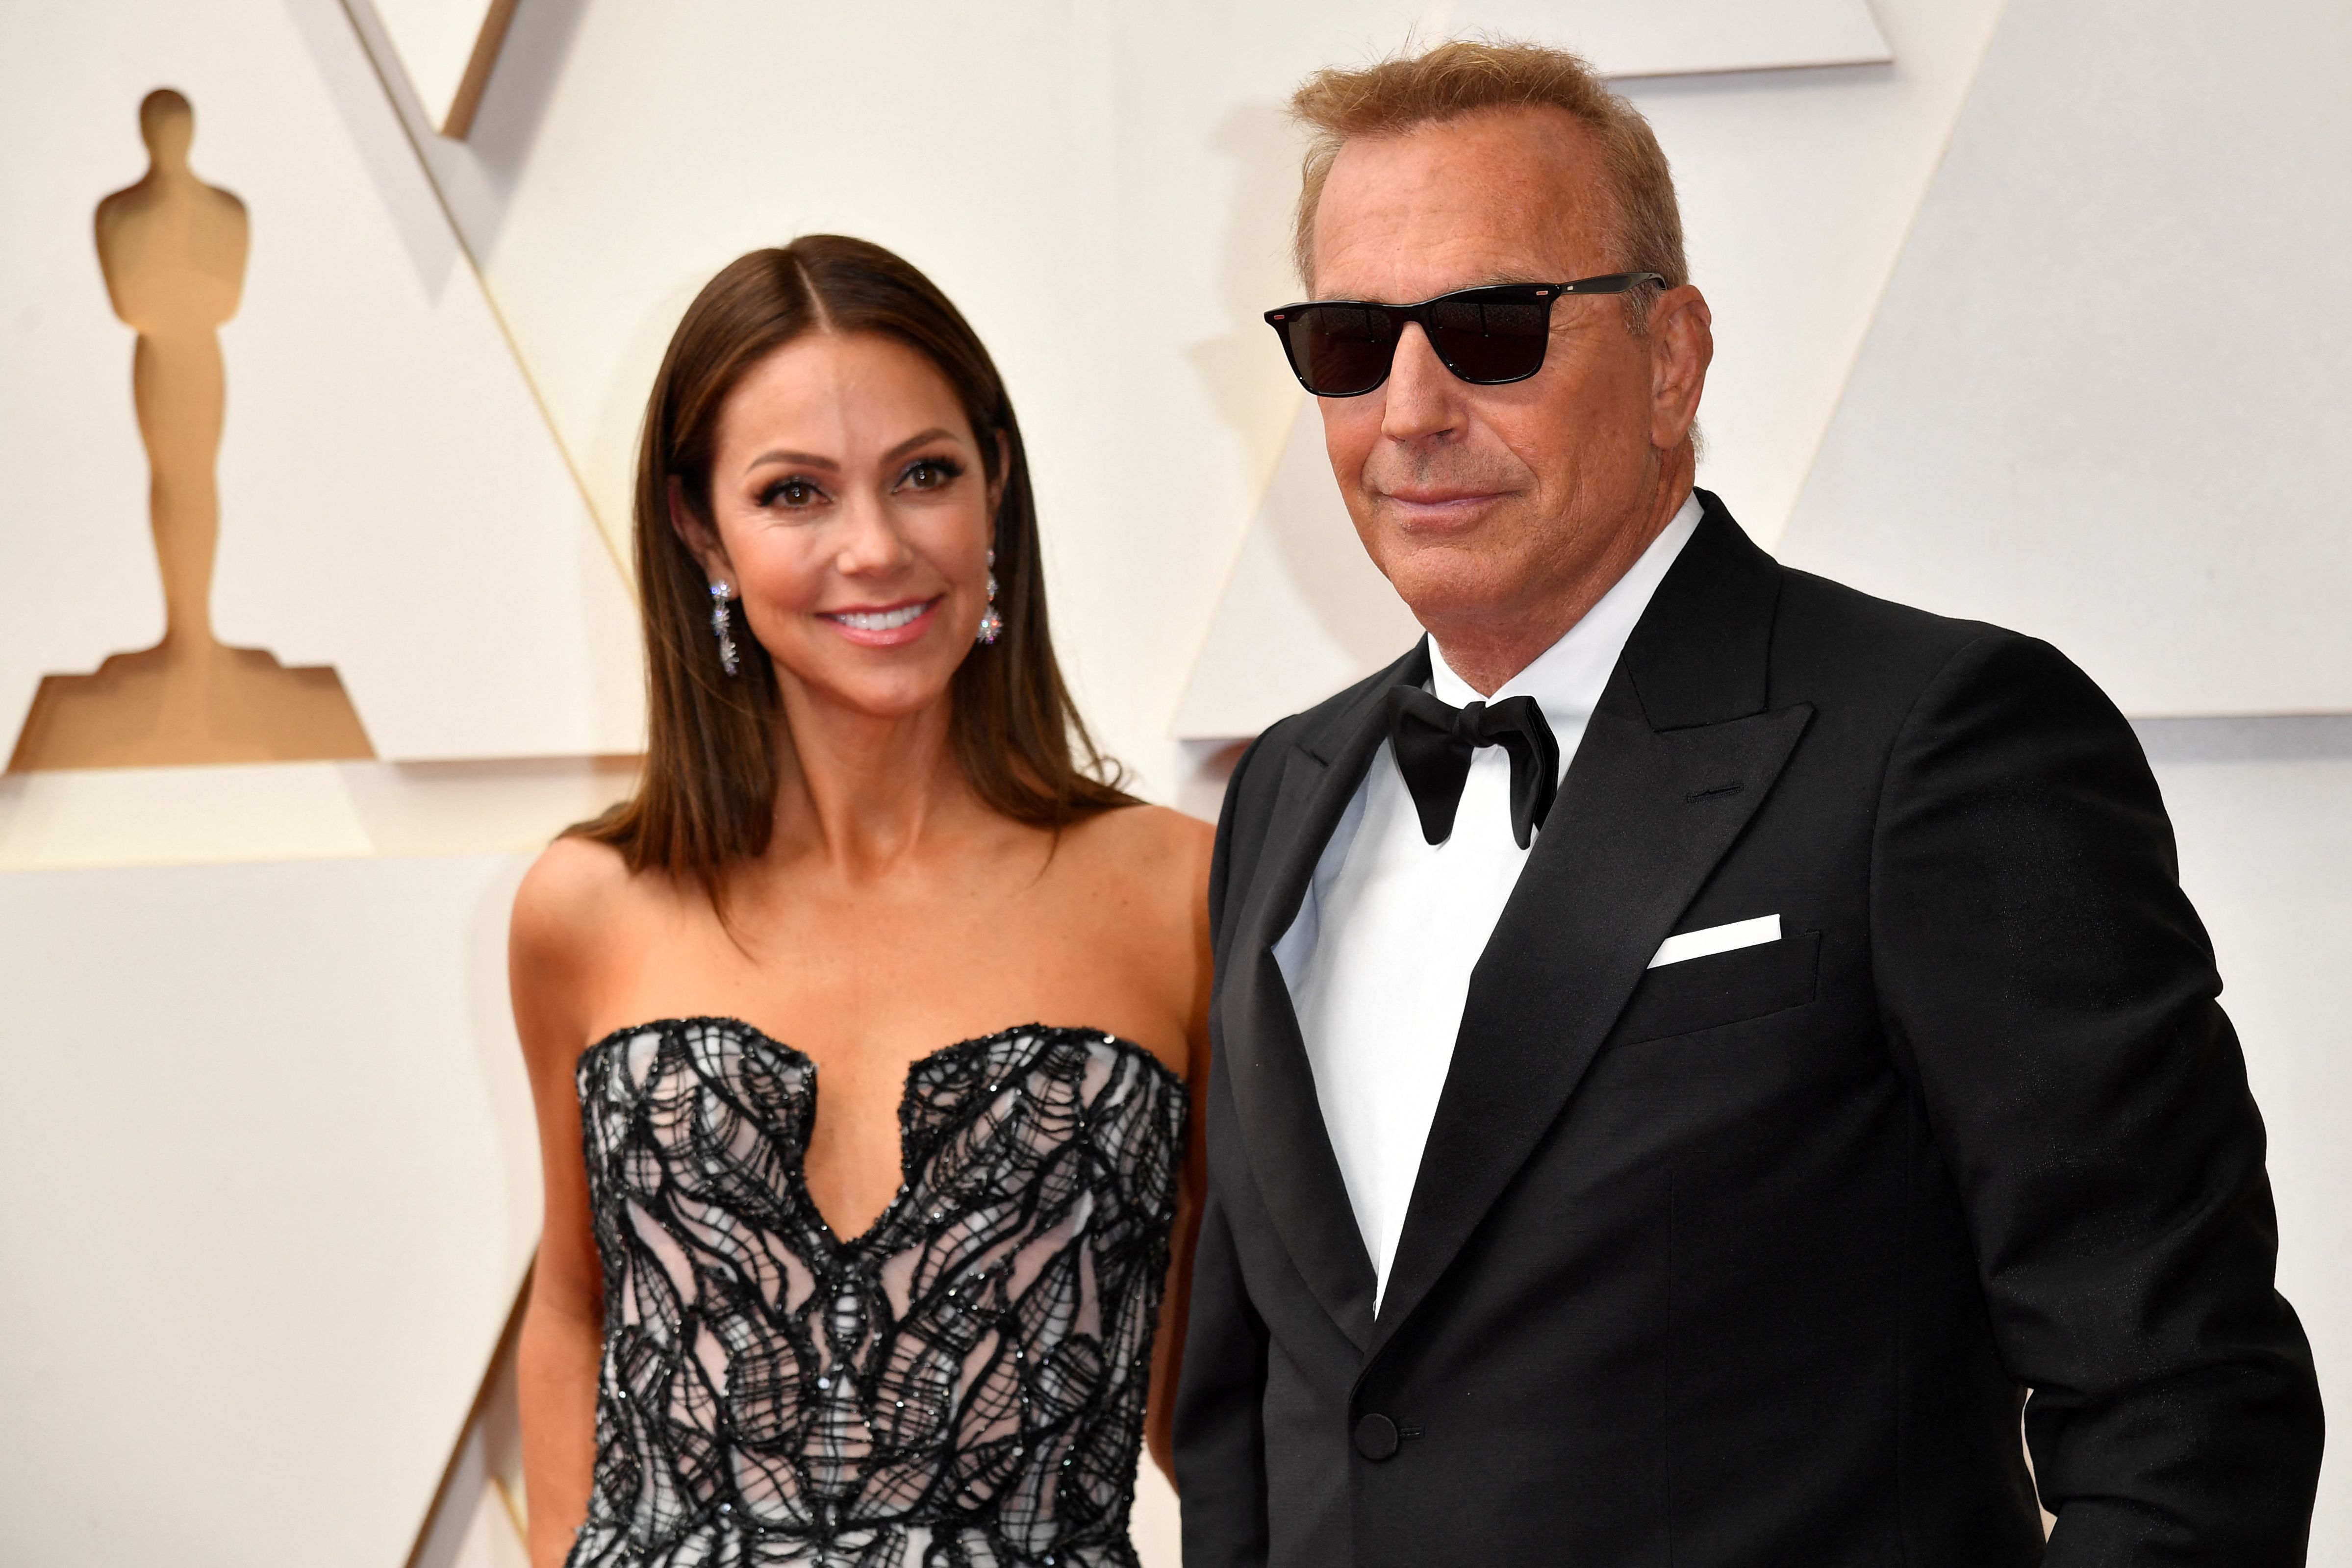 Kevin Costner and Christine Baumgartner at the 94th Oscars on March 27, 2022 | Source: Getty Images